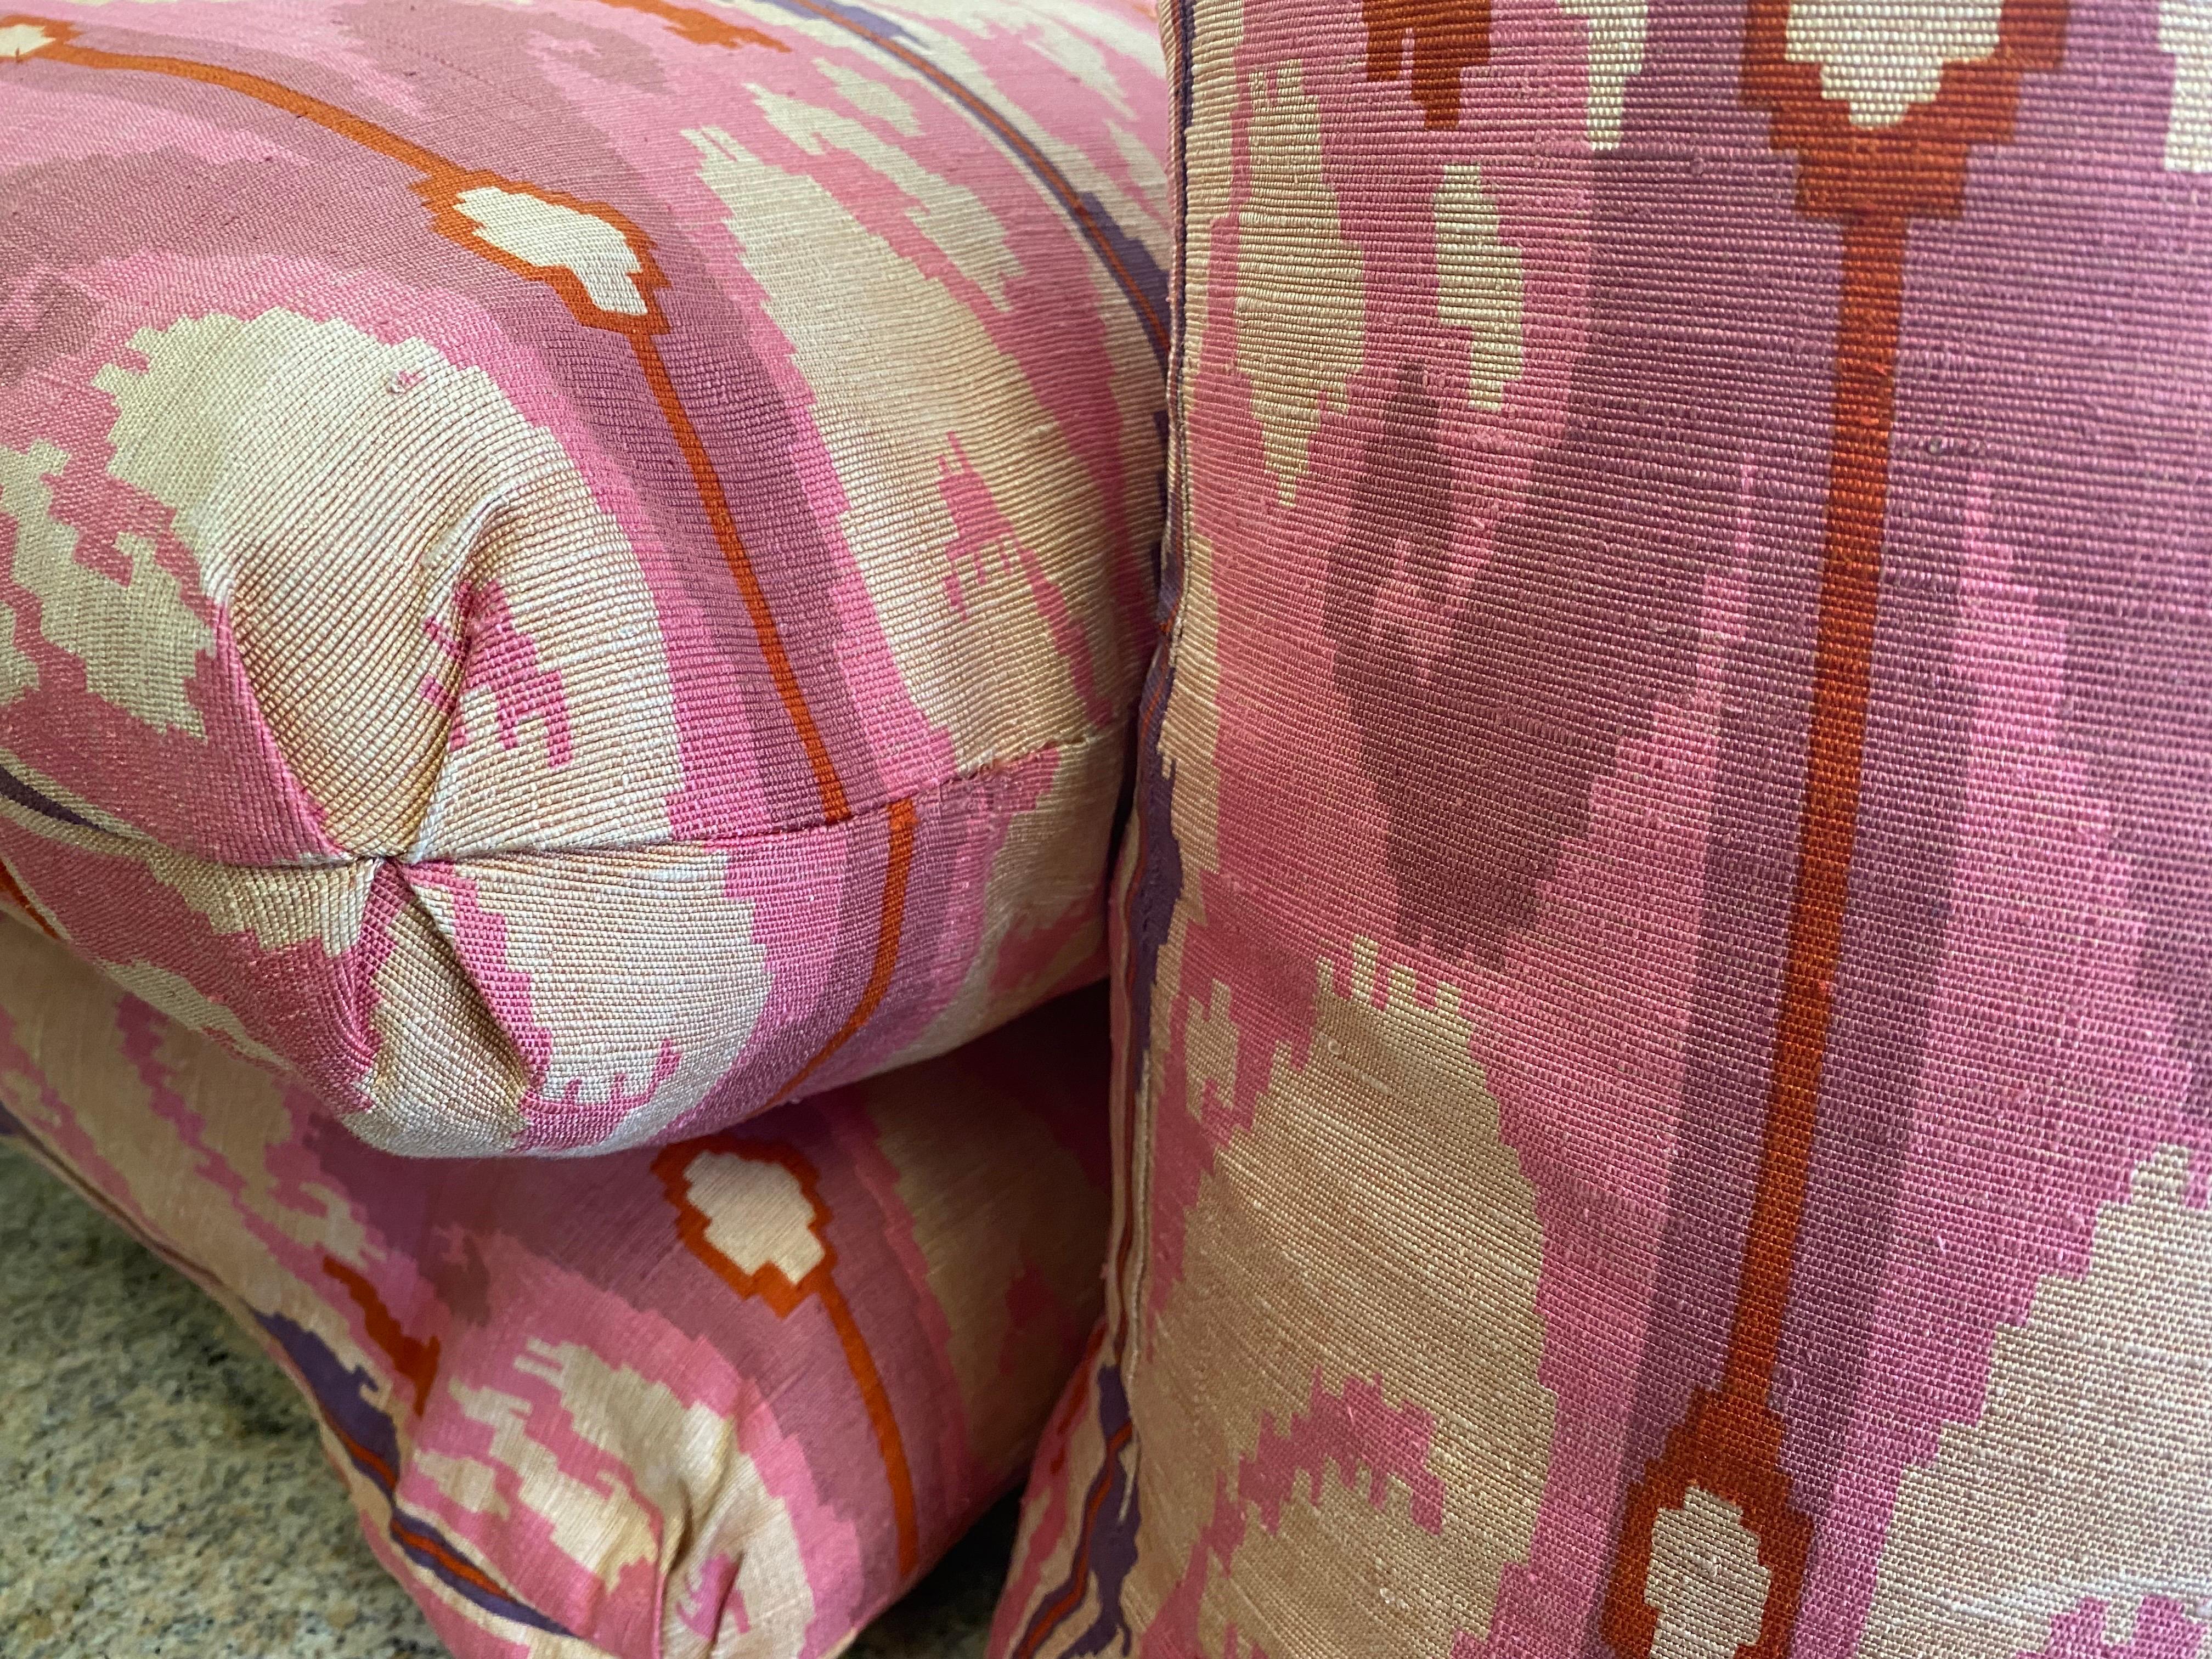 Set of four throw pillows designed by the late Steve Chase. He picked a beautiful bright, modern Ikat print for a living room in Palm Springs, California. I believe they are a silk linen blend. No fabric tag. There are a total of 10 available on